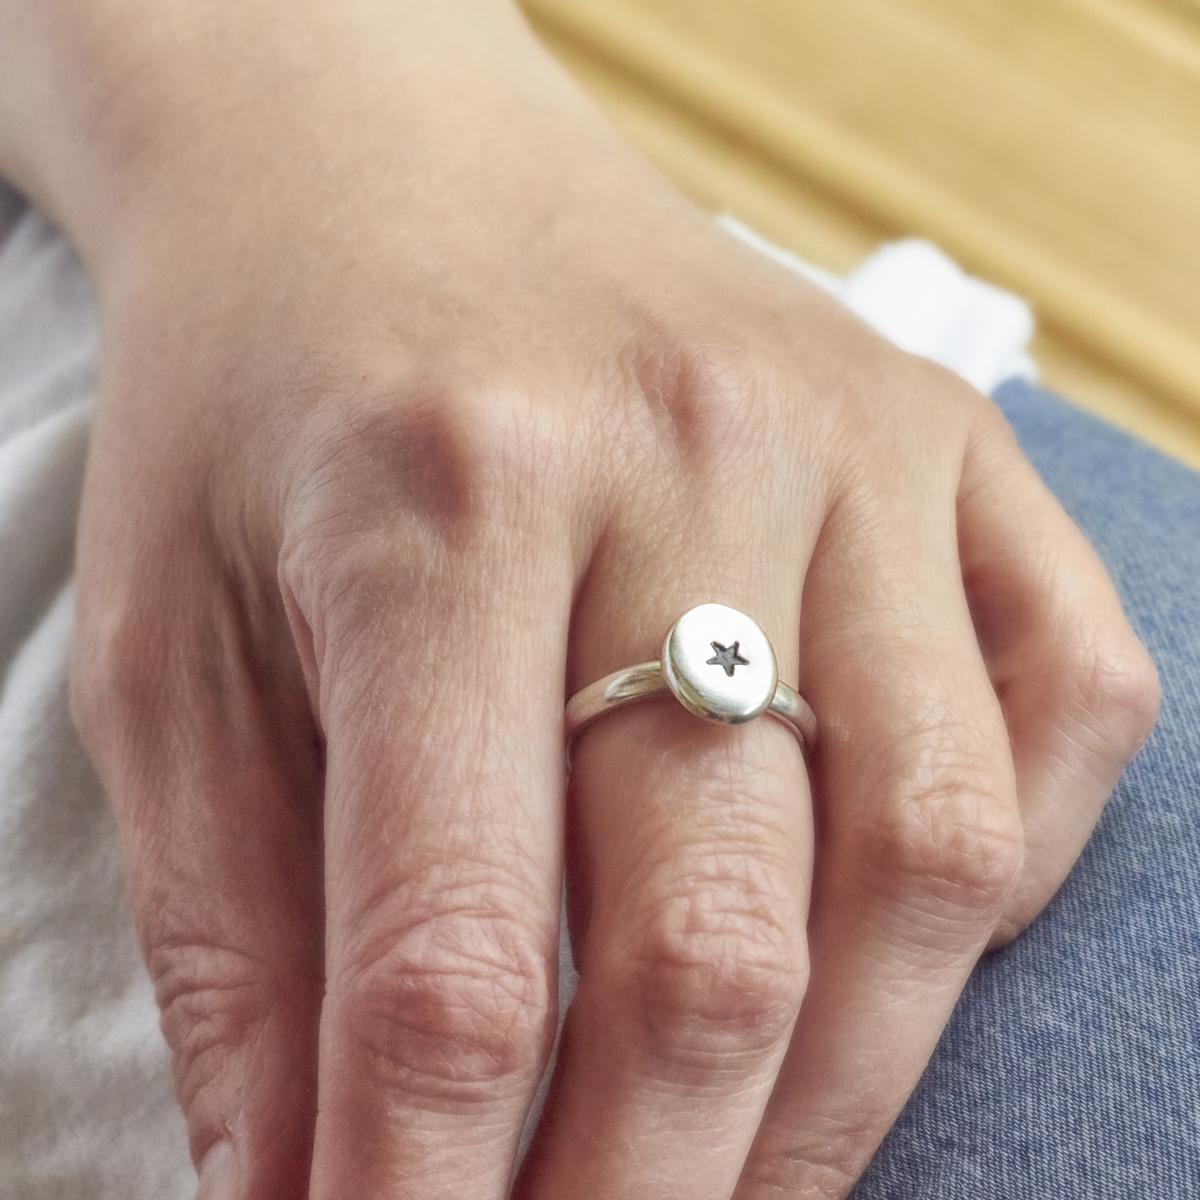 silver star pebble ring by emma white, available from the jewellery makers, IMAGE PROPERTY OF EMMA WHITE-1